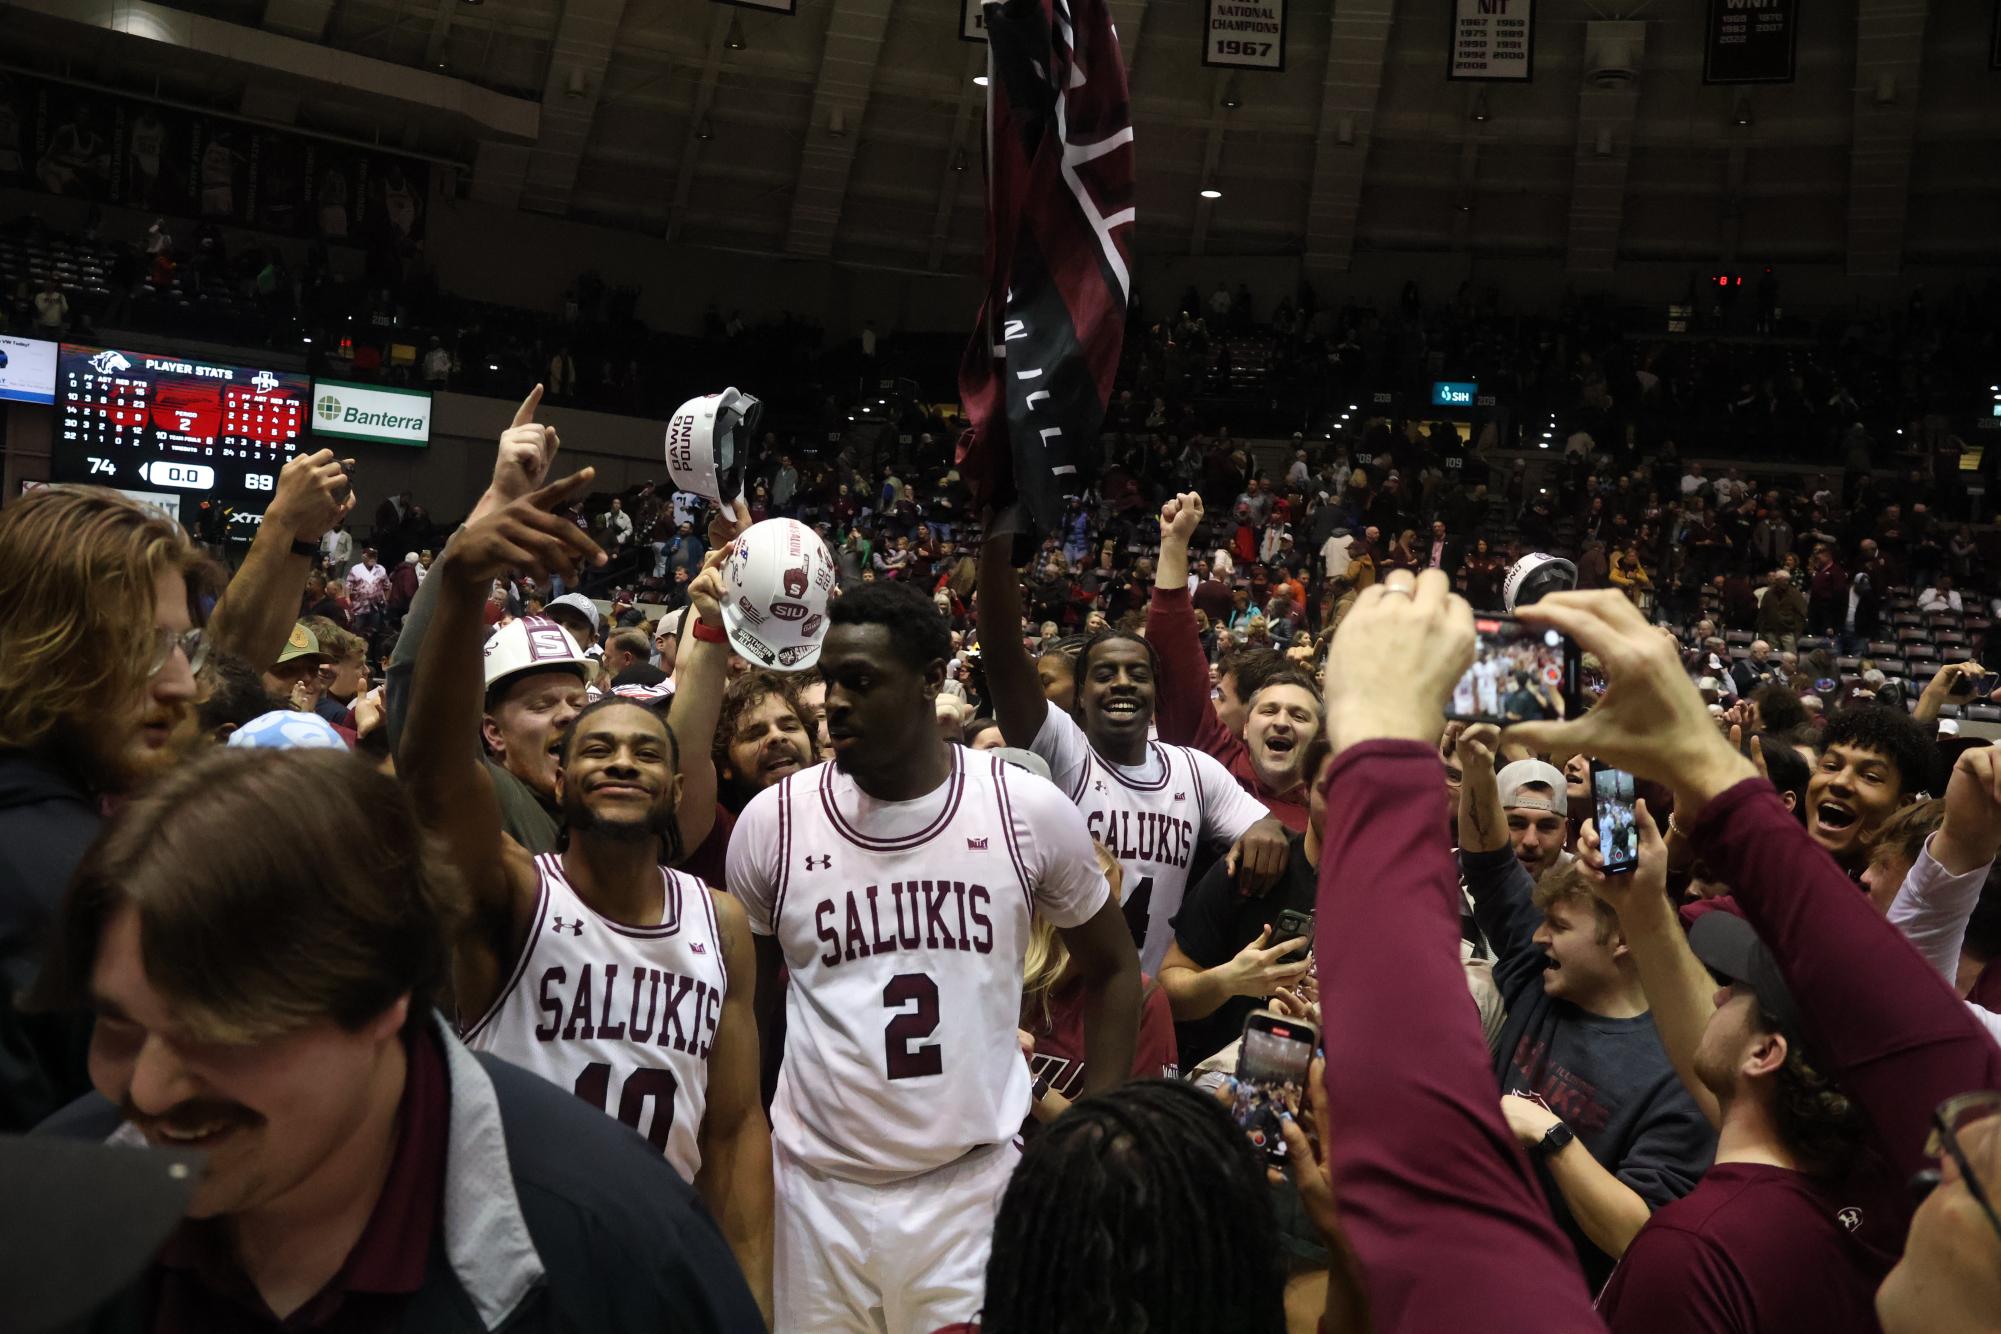 Clarence Rupert (4) waves the SIU flag in a crowd of Saluki players and fans as the Salukis take down No. 23 Indiana State at home Feb. 17, 2024 at Banterra Center in Carbondale, Illinois.